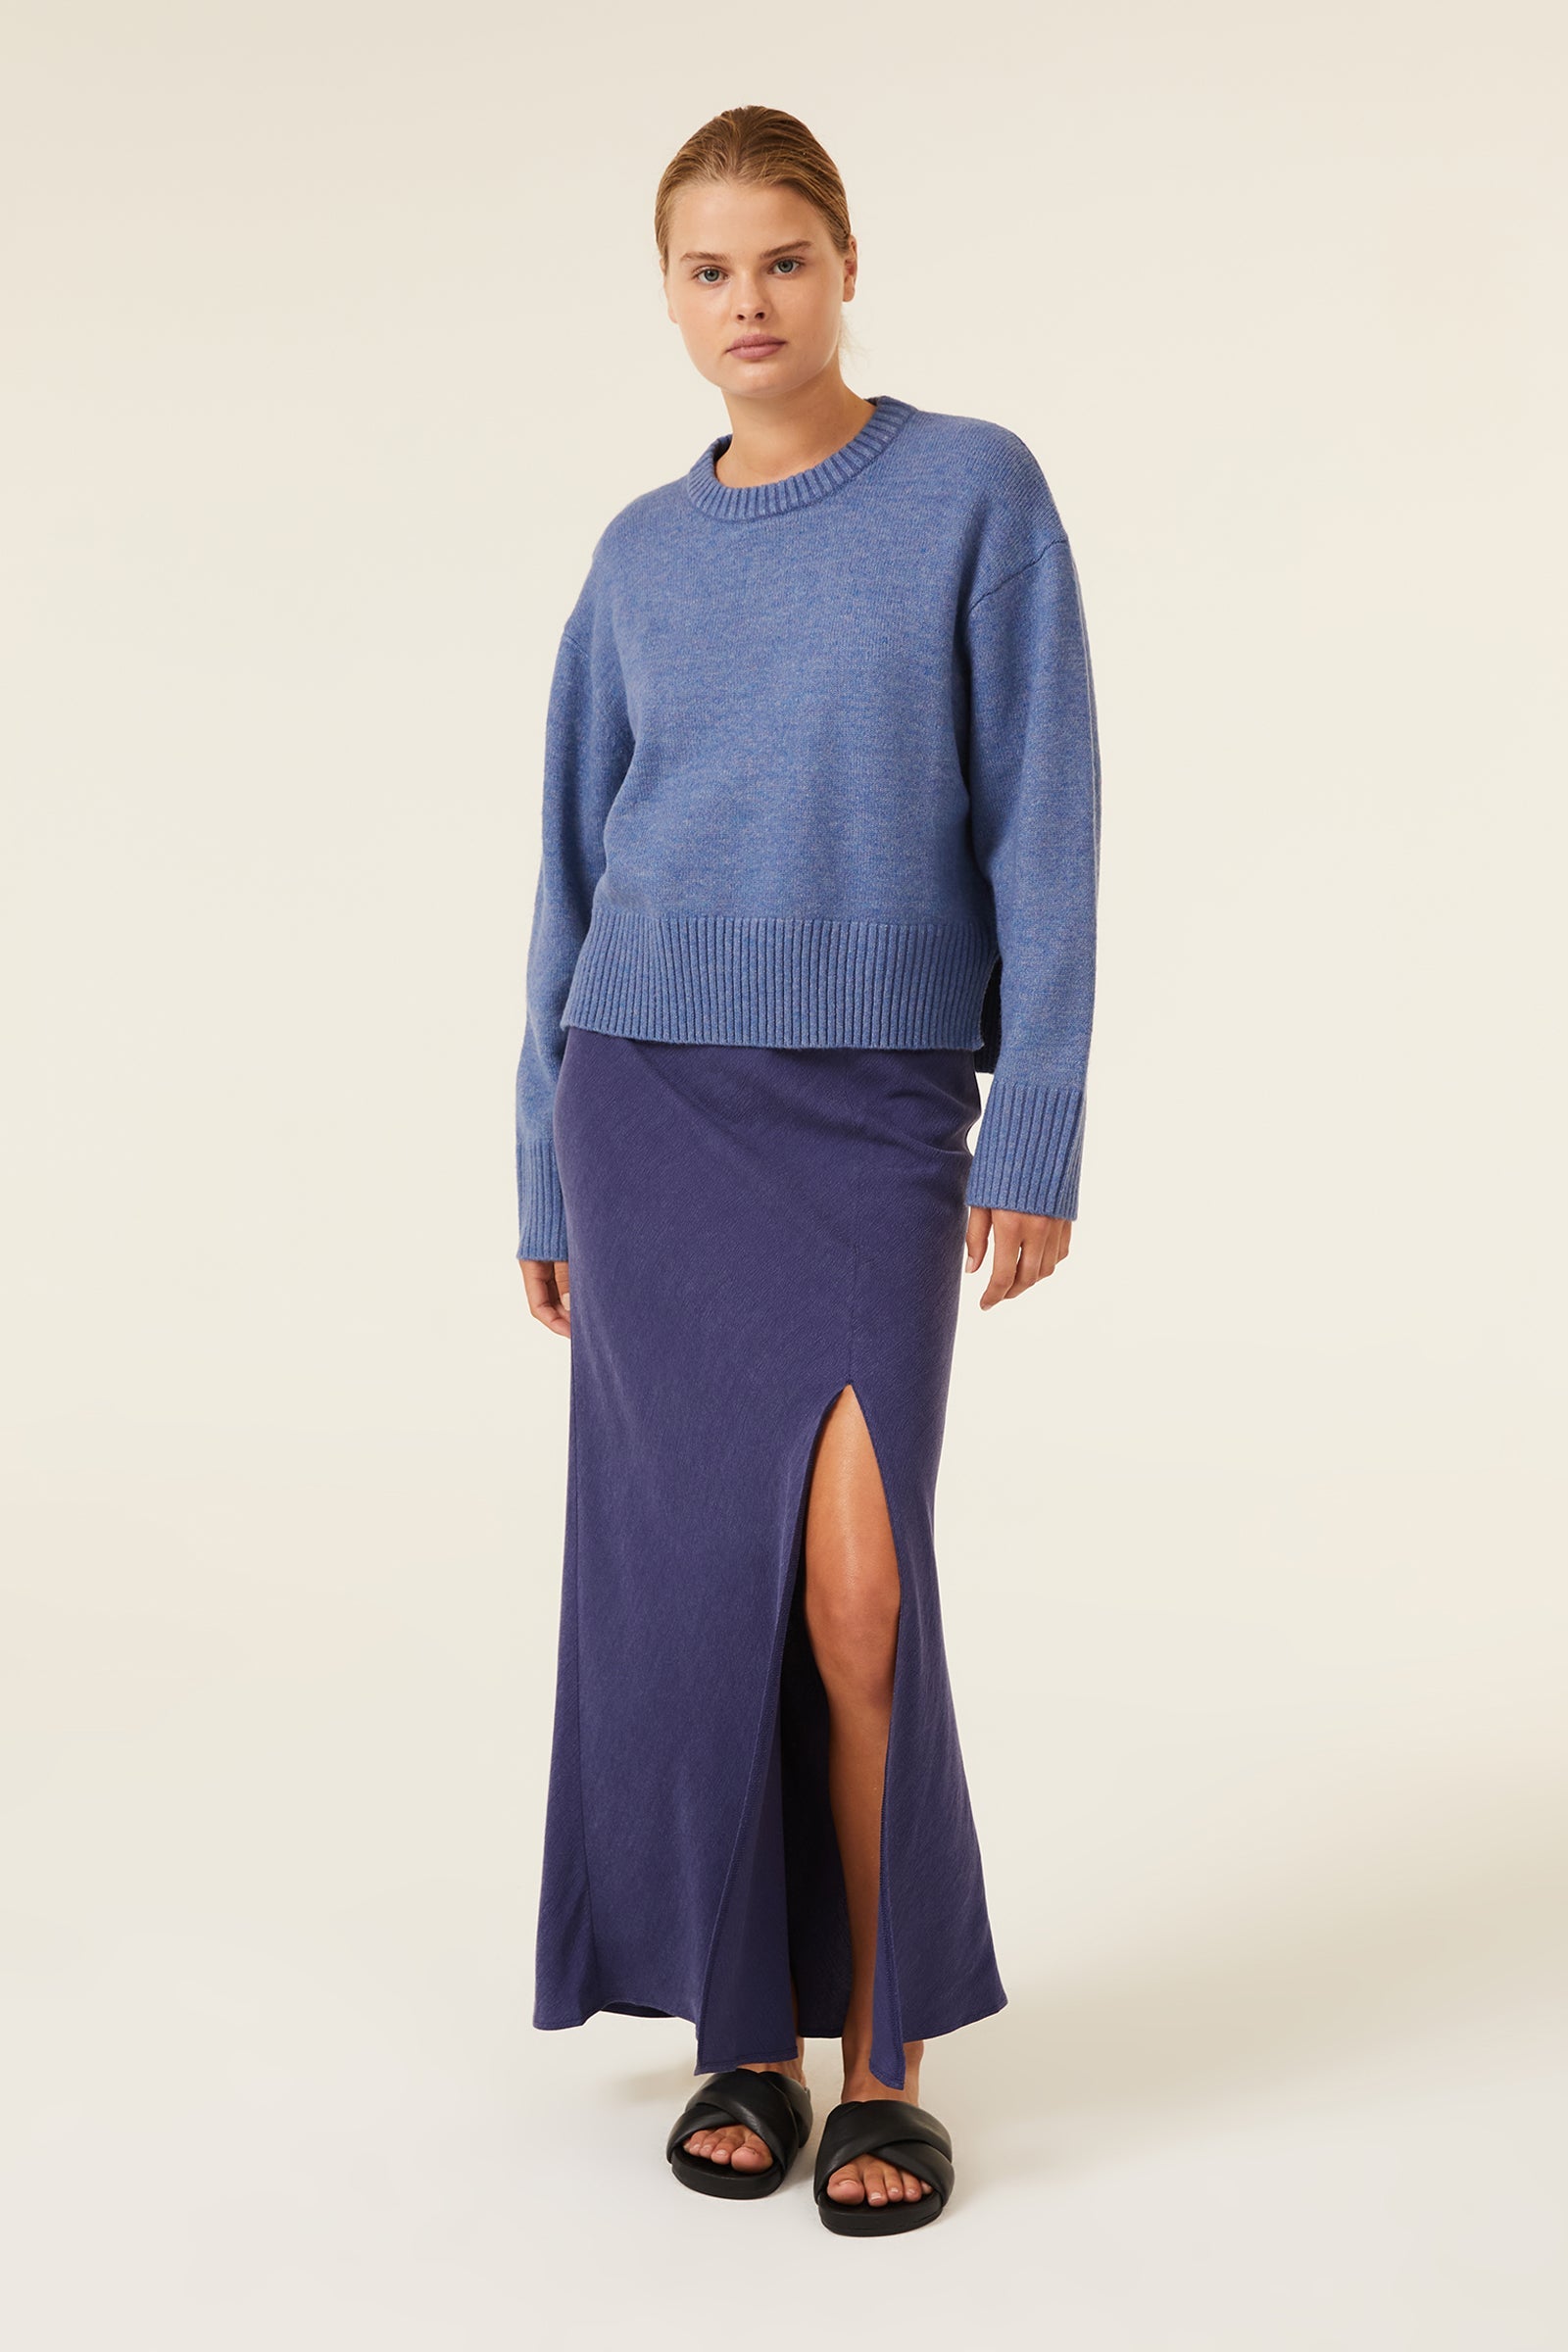 Nude Lucy Finley Knit – Flynn's Inland Surf Co.